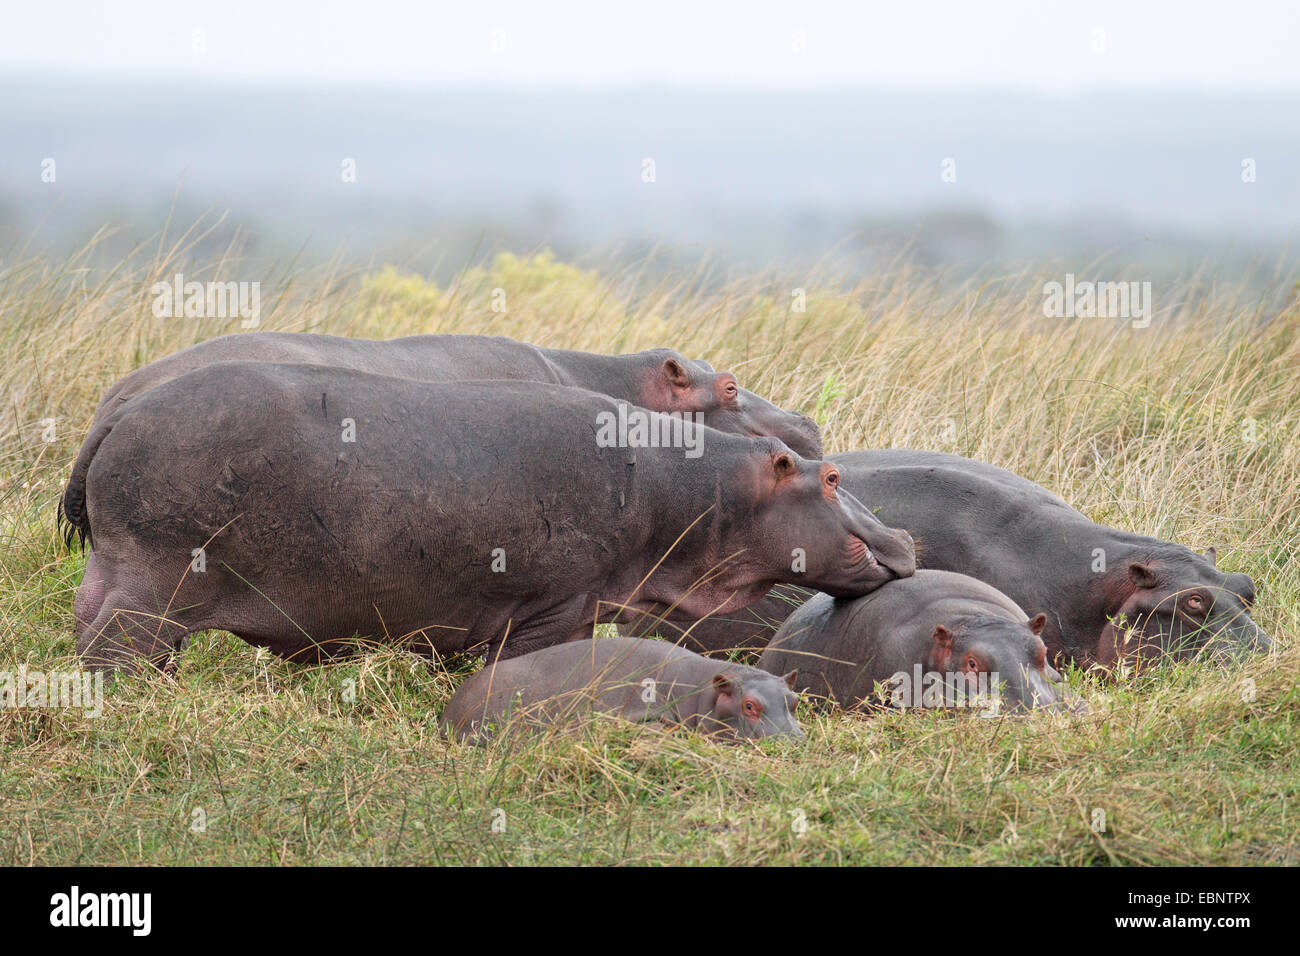 hippopotamus, hippo, Common hippopotamus (Hippopotamus amphibius), group with young hippos at the shore of  a lake, South Africa, St. Lucia Stock Photo